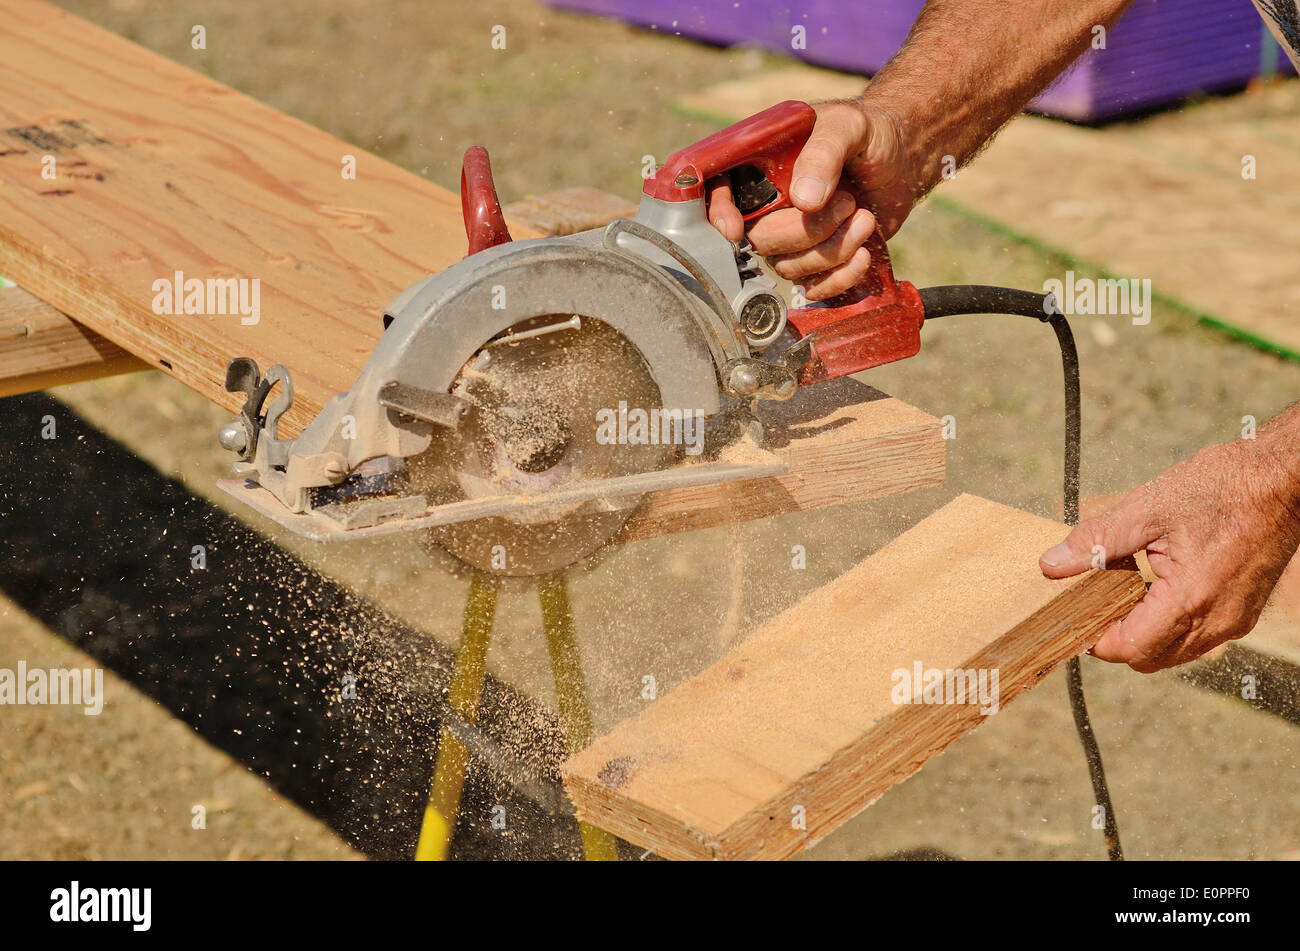 Building contractor worker using hand held worm drive circular saw to cut boards on a new home construction project Stock Photo